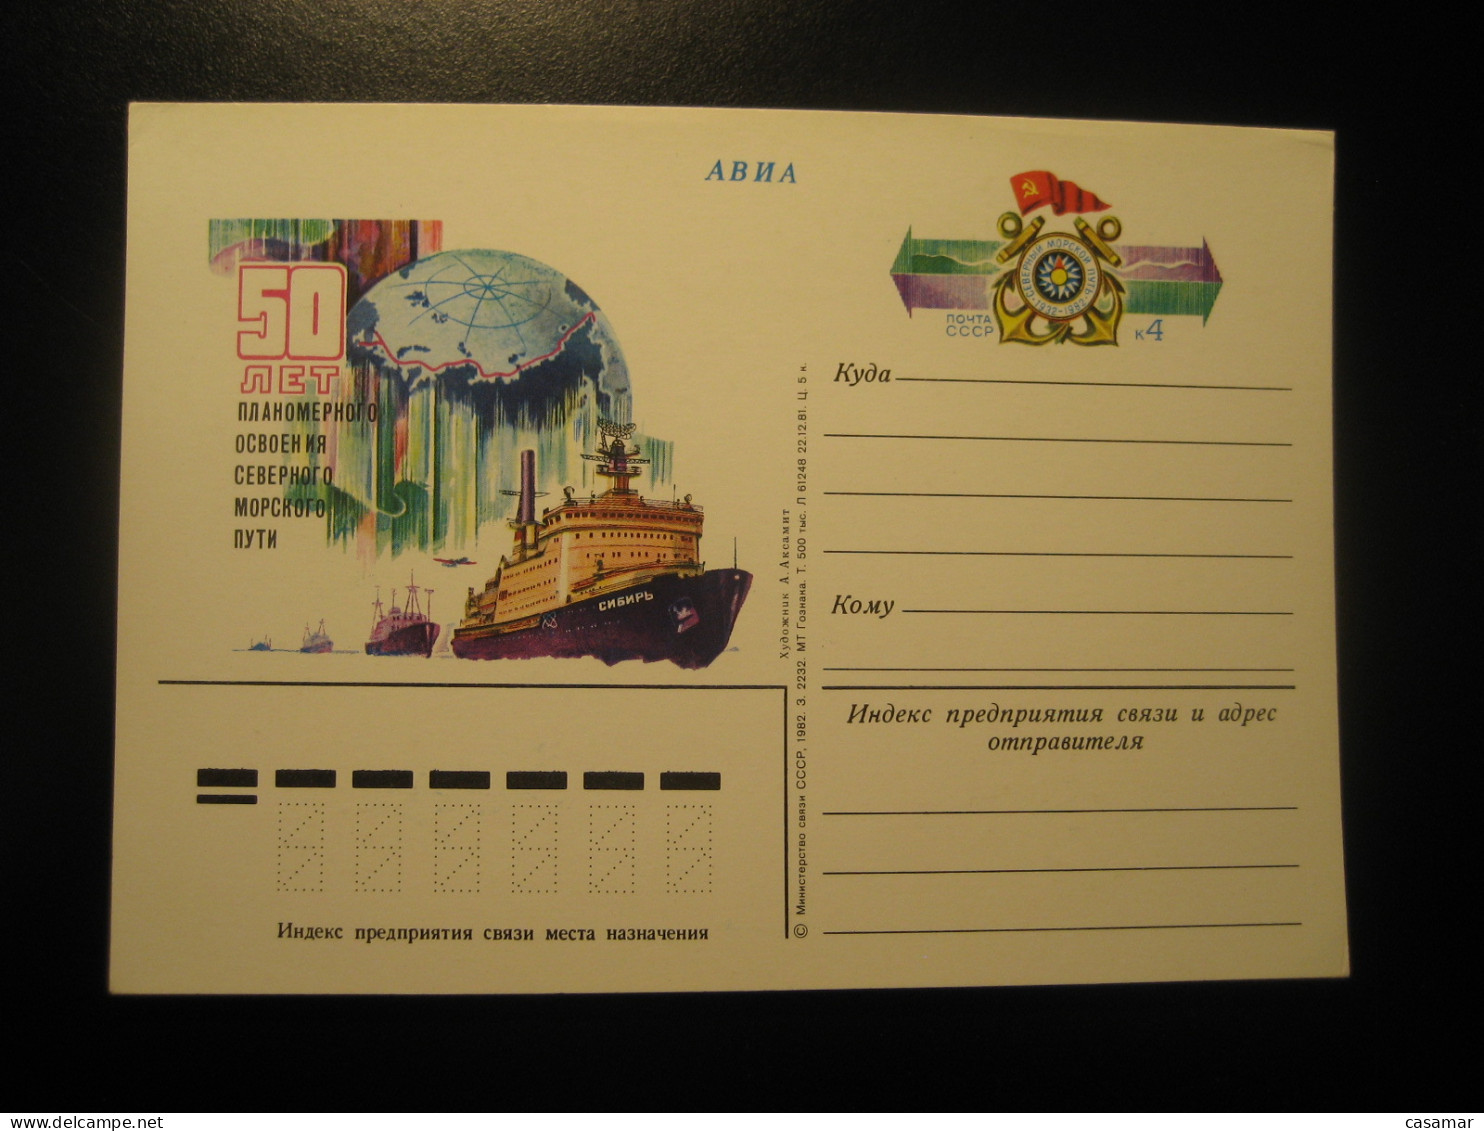 1981 1982 Northern Sea Routes Polar Arctic North Pole Arctics Postal Stationery Card RUSSIA USSR - Andere Verkehrsträger